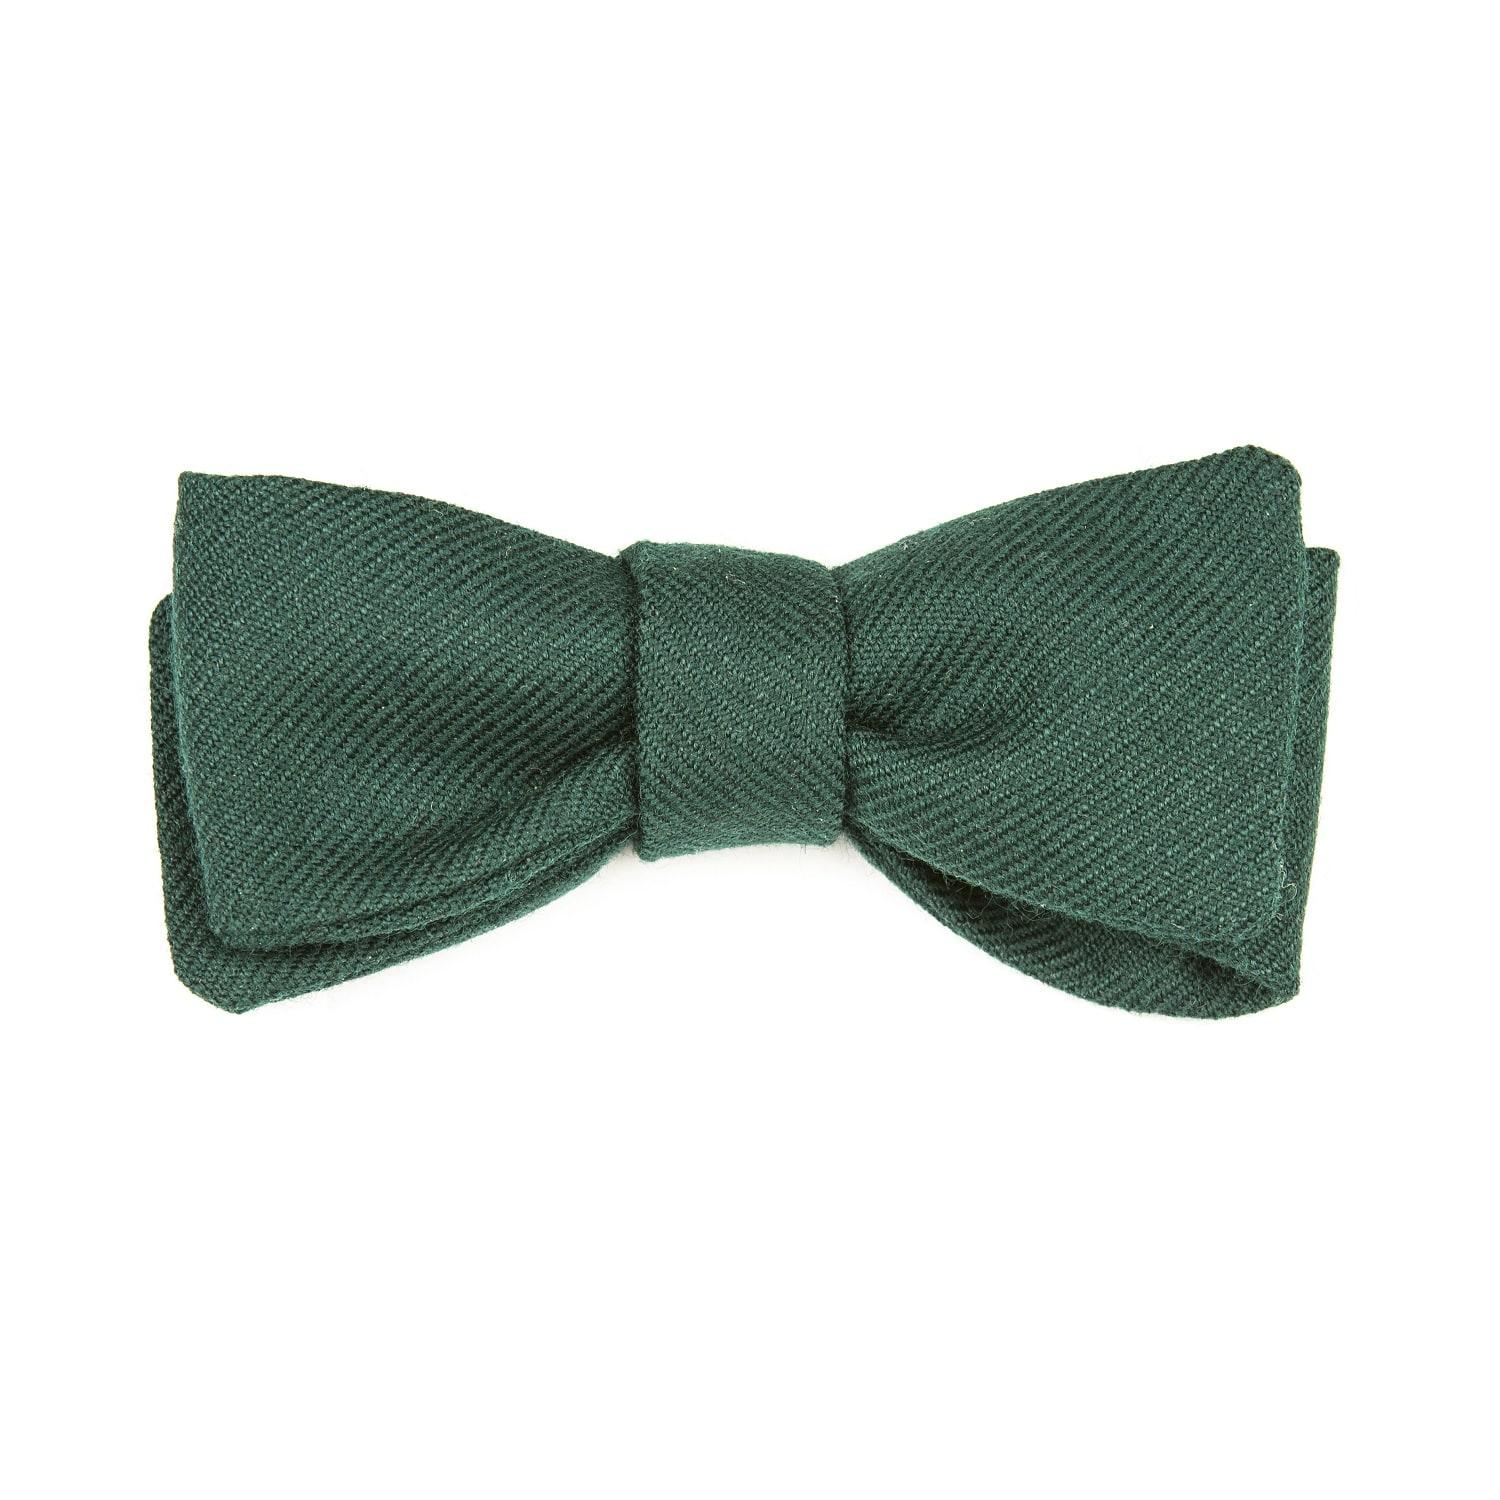 Lyst - Robinson & Dapper Straight Racing Green Bow Tie in Green for Men